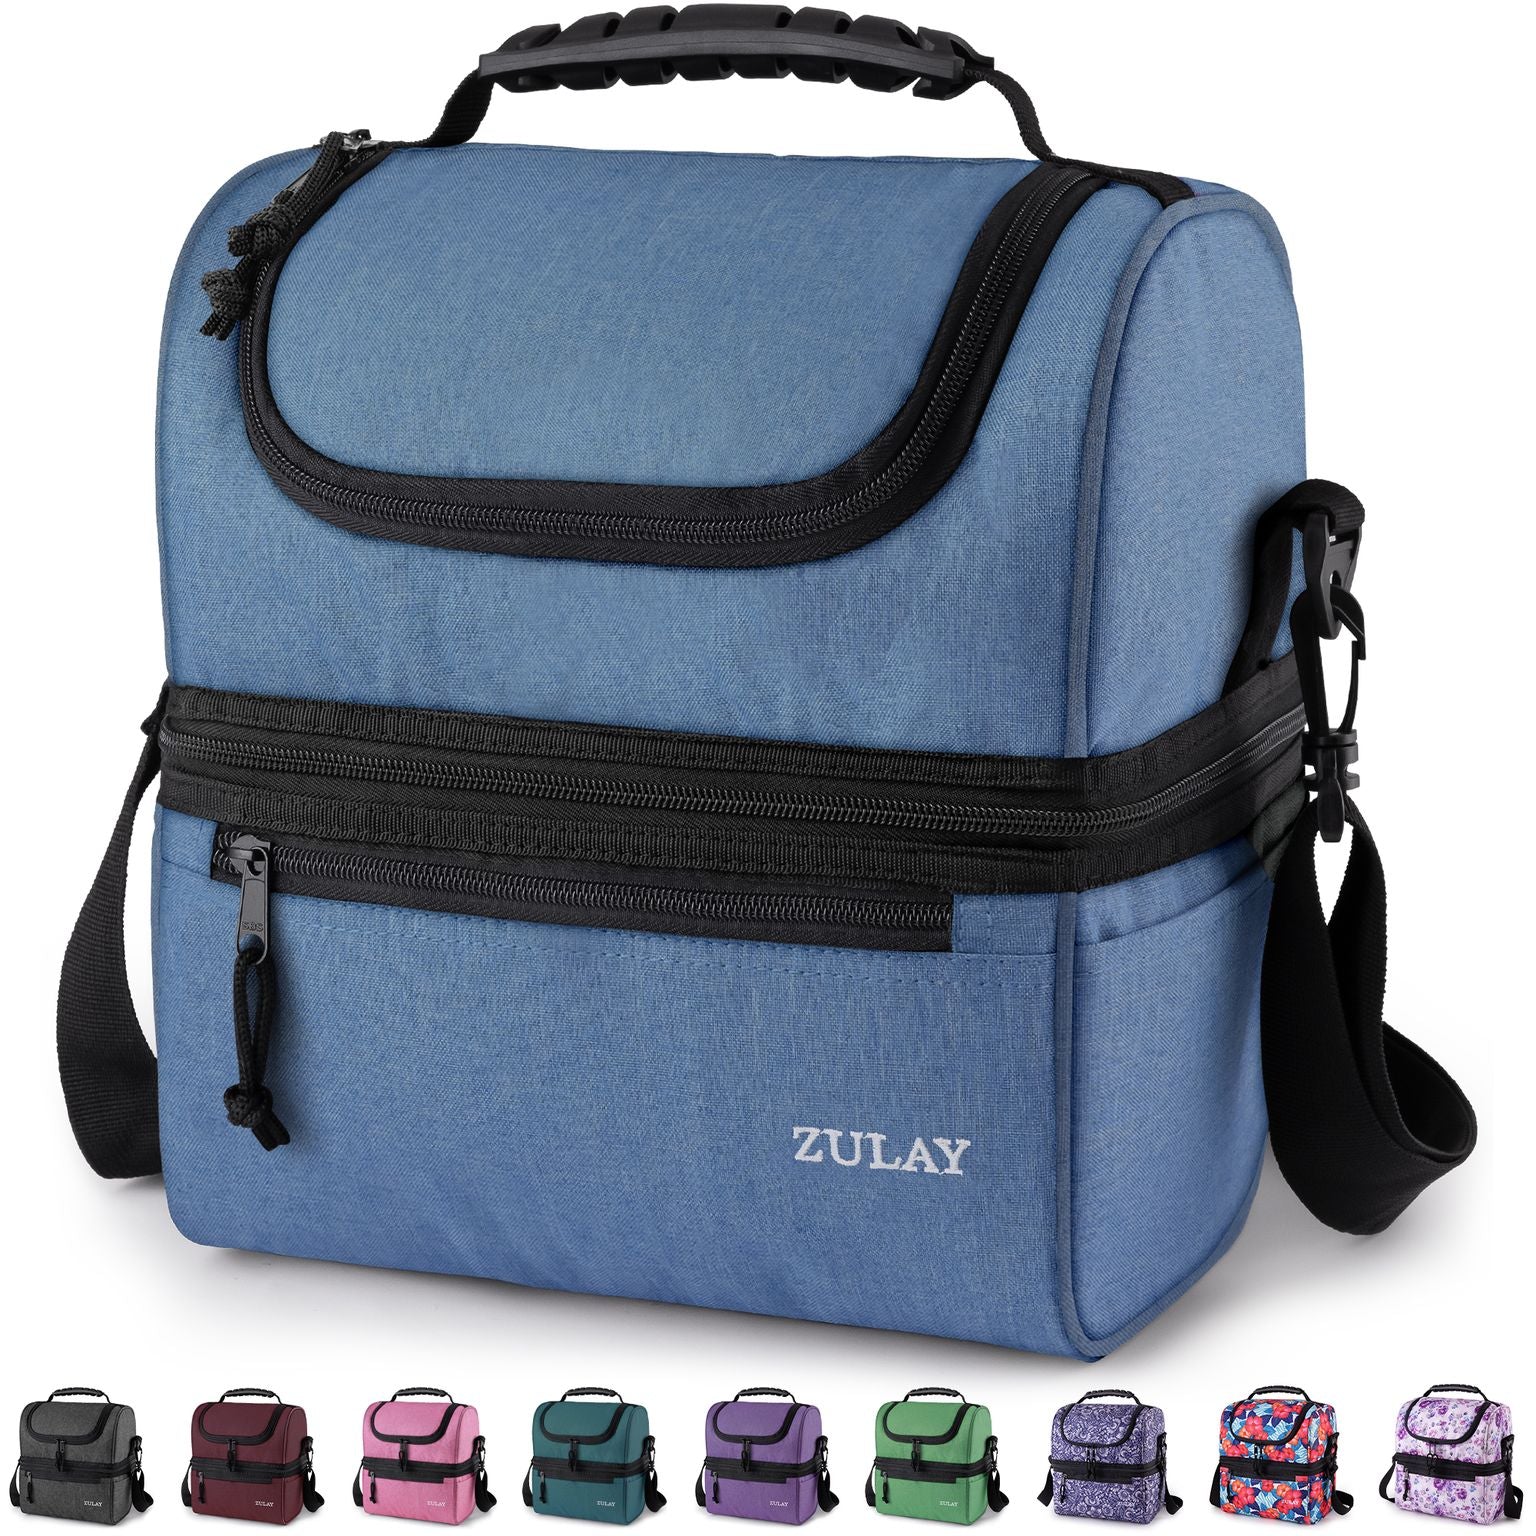 Zulay Kitchen Insulated Lunch Bag With Compartment & Built-In